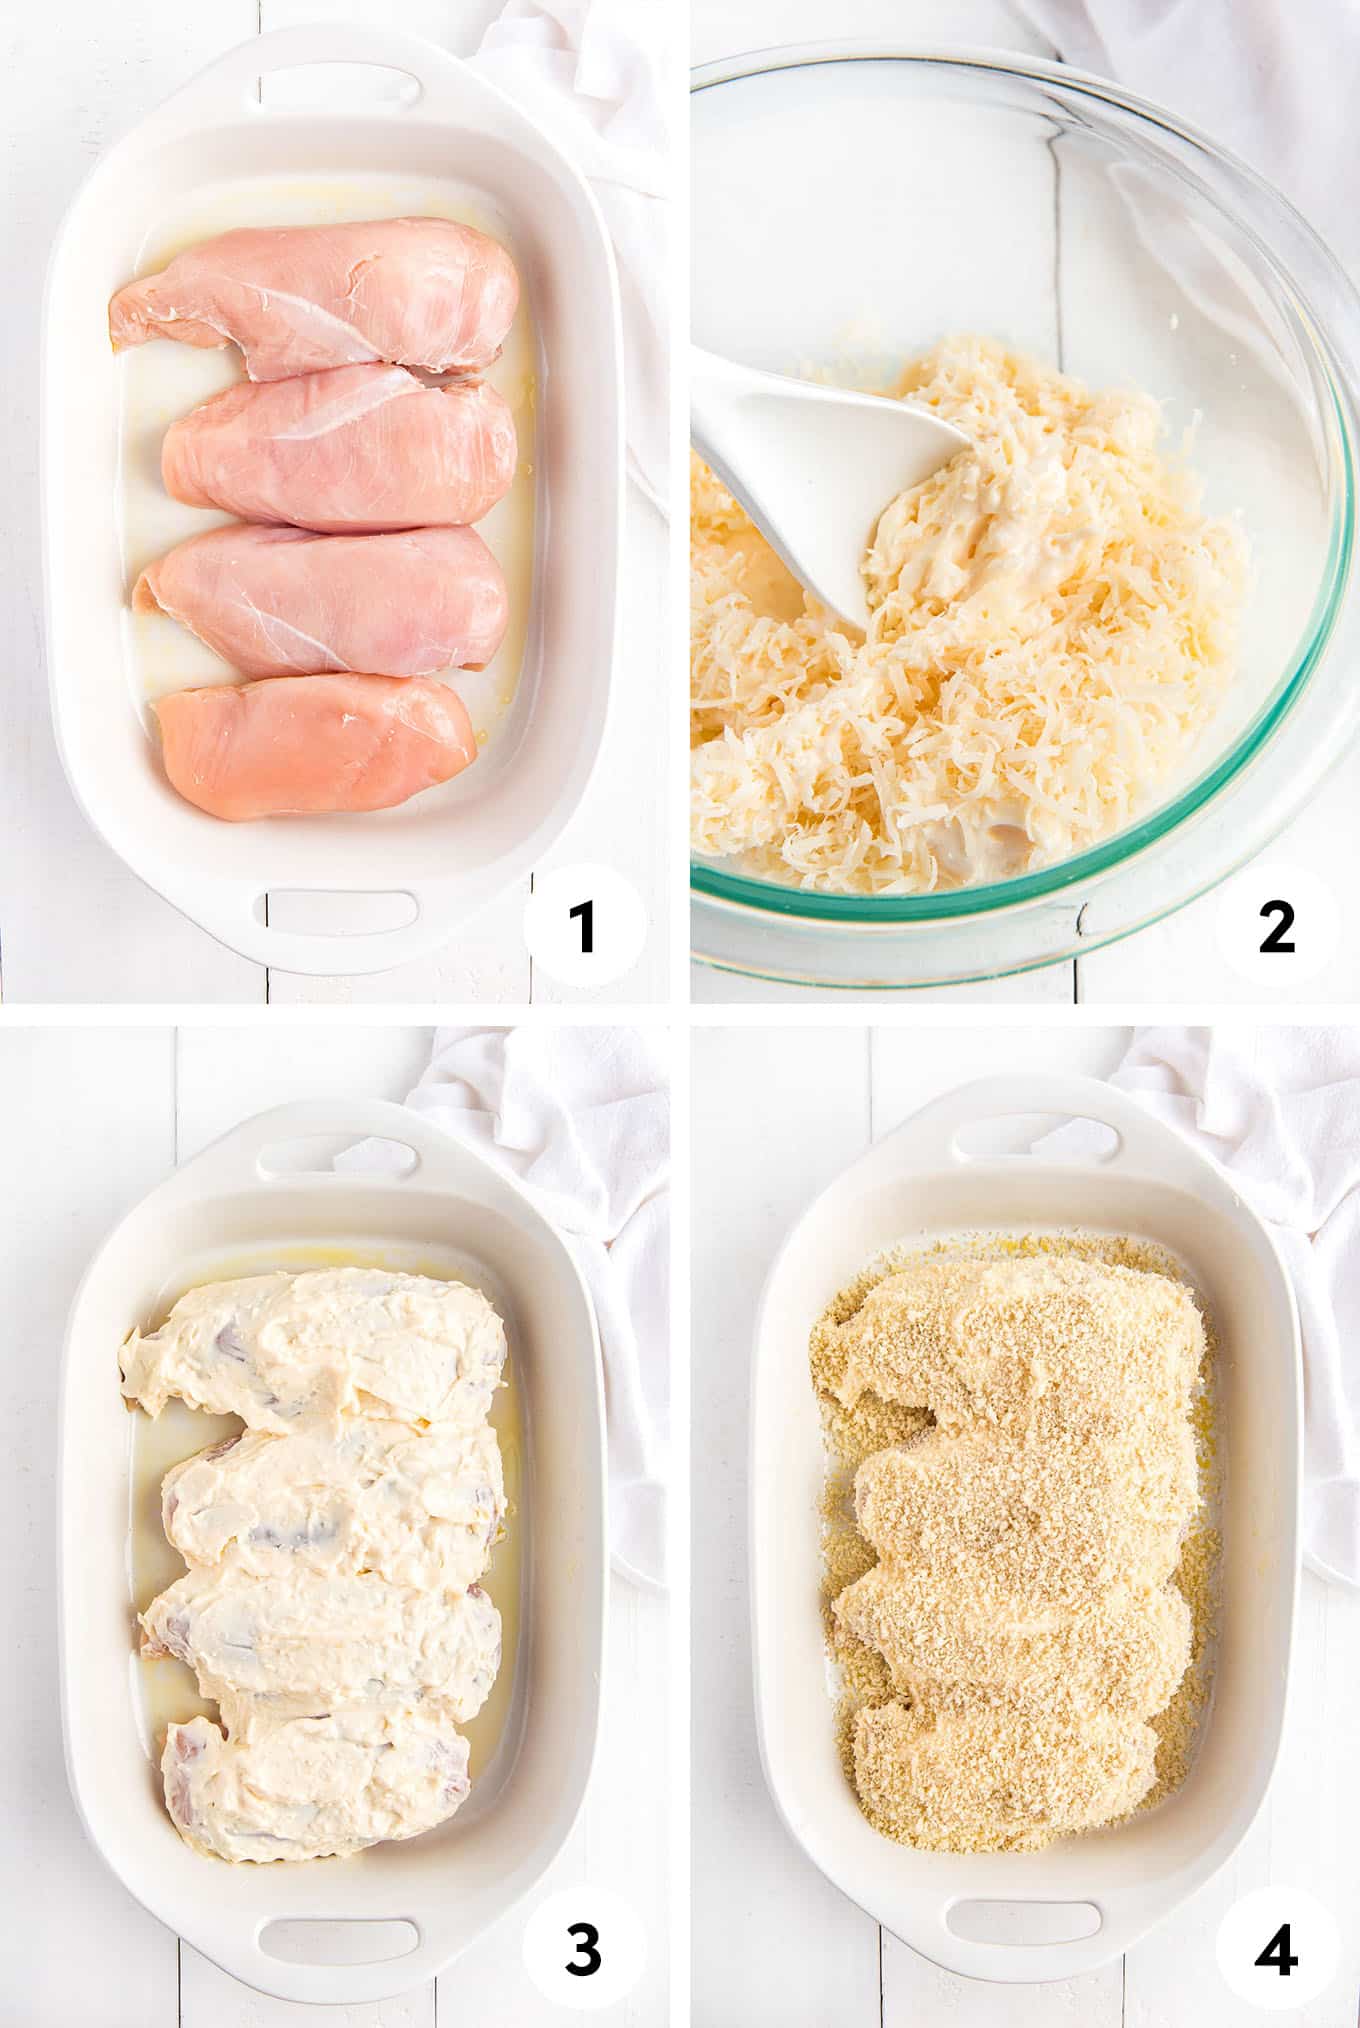 A collage of images showing the chicken in a baking dish, mixing the mayo and cheese, adding it to the top of the chicken, and finally adding the breadcrumbs.